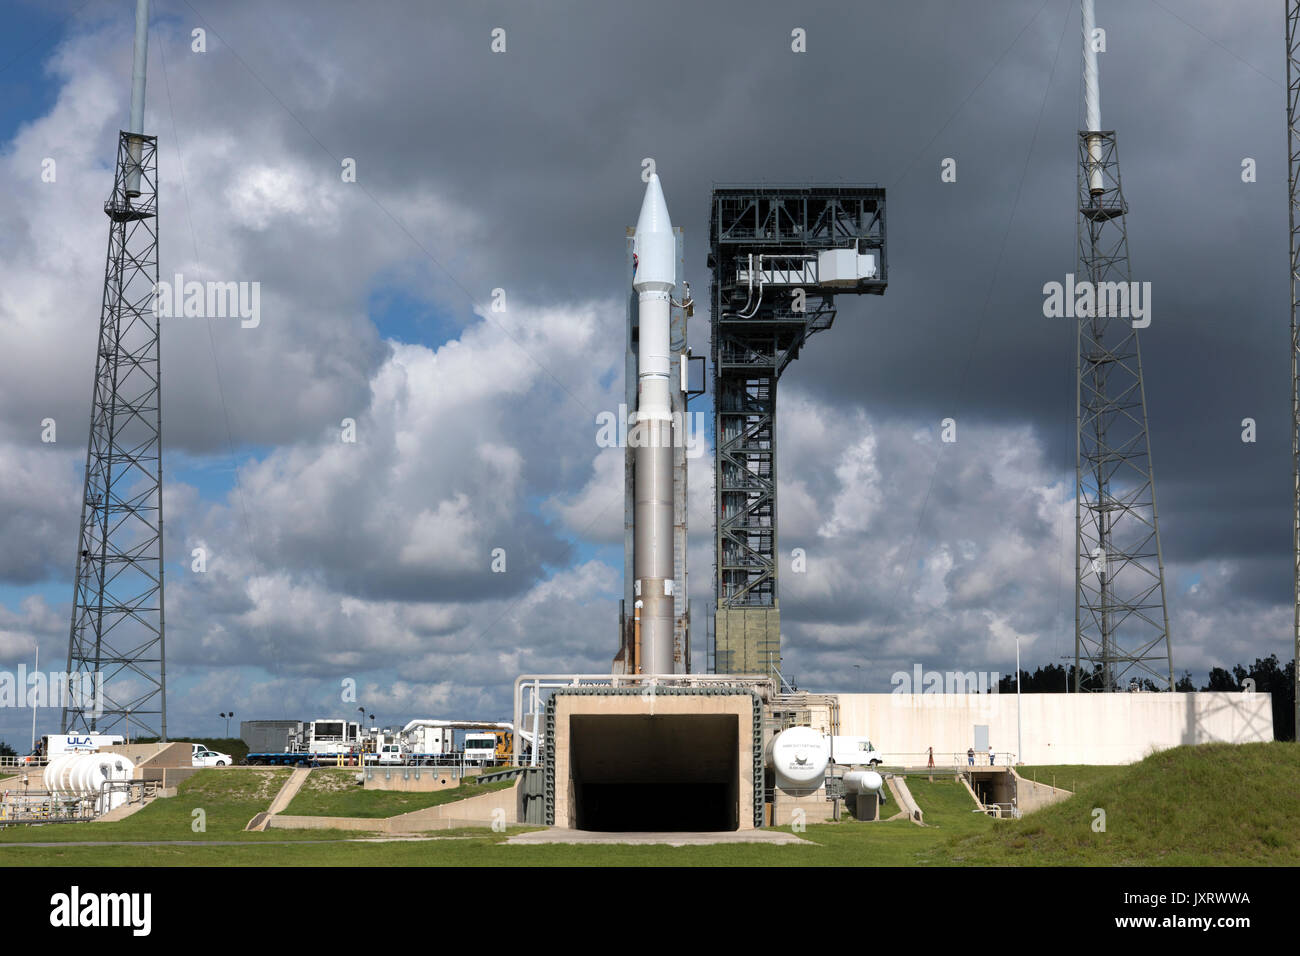 Cape Canaveral, United States Of America. 16th Aug, 2017. The United Launch Alliance Atlas V rocket is positions at Space Launch Complex 41 at Cape Canaveral Air Force Station August 16, 2017 in Cape Canaveral, Florida. The commercial rocket scheduled to send NASA's Tracking and Data Relay Satellite, TDRS-M to orbit on August 18th. Credit: Planetpix/Alamy Live News Stock Photo